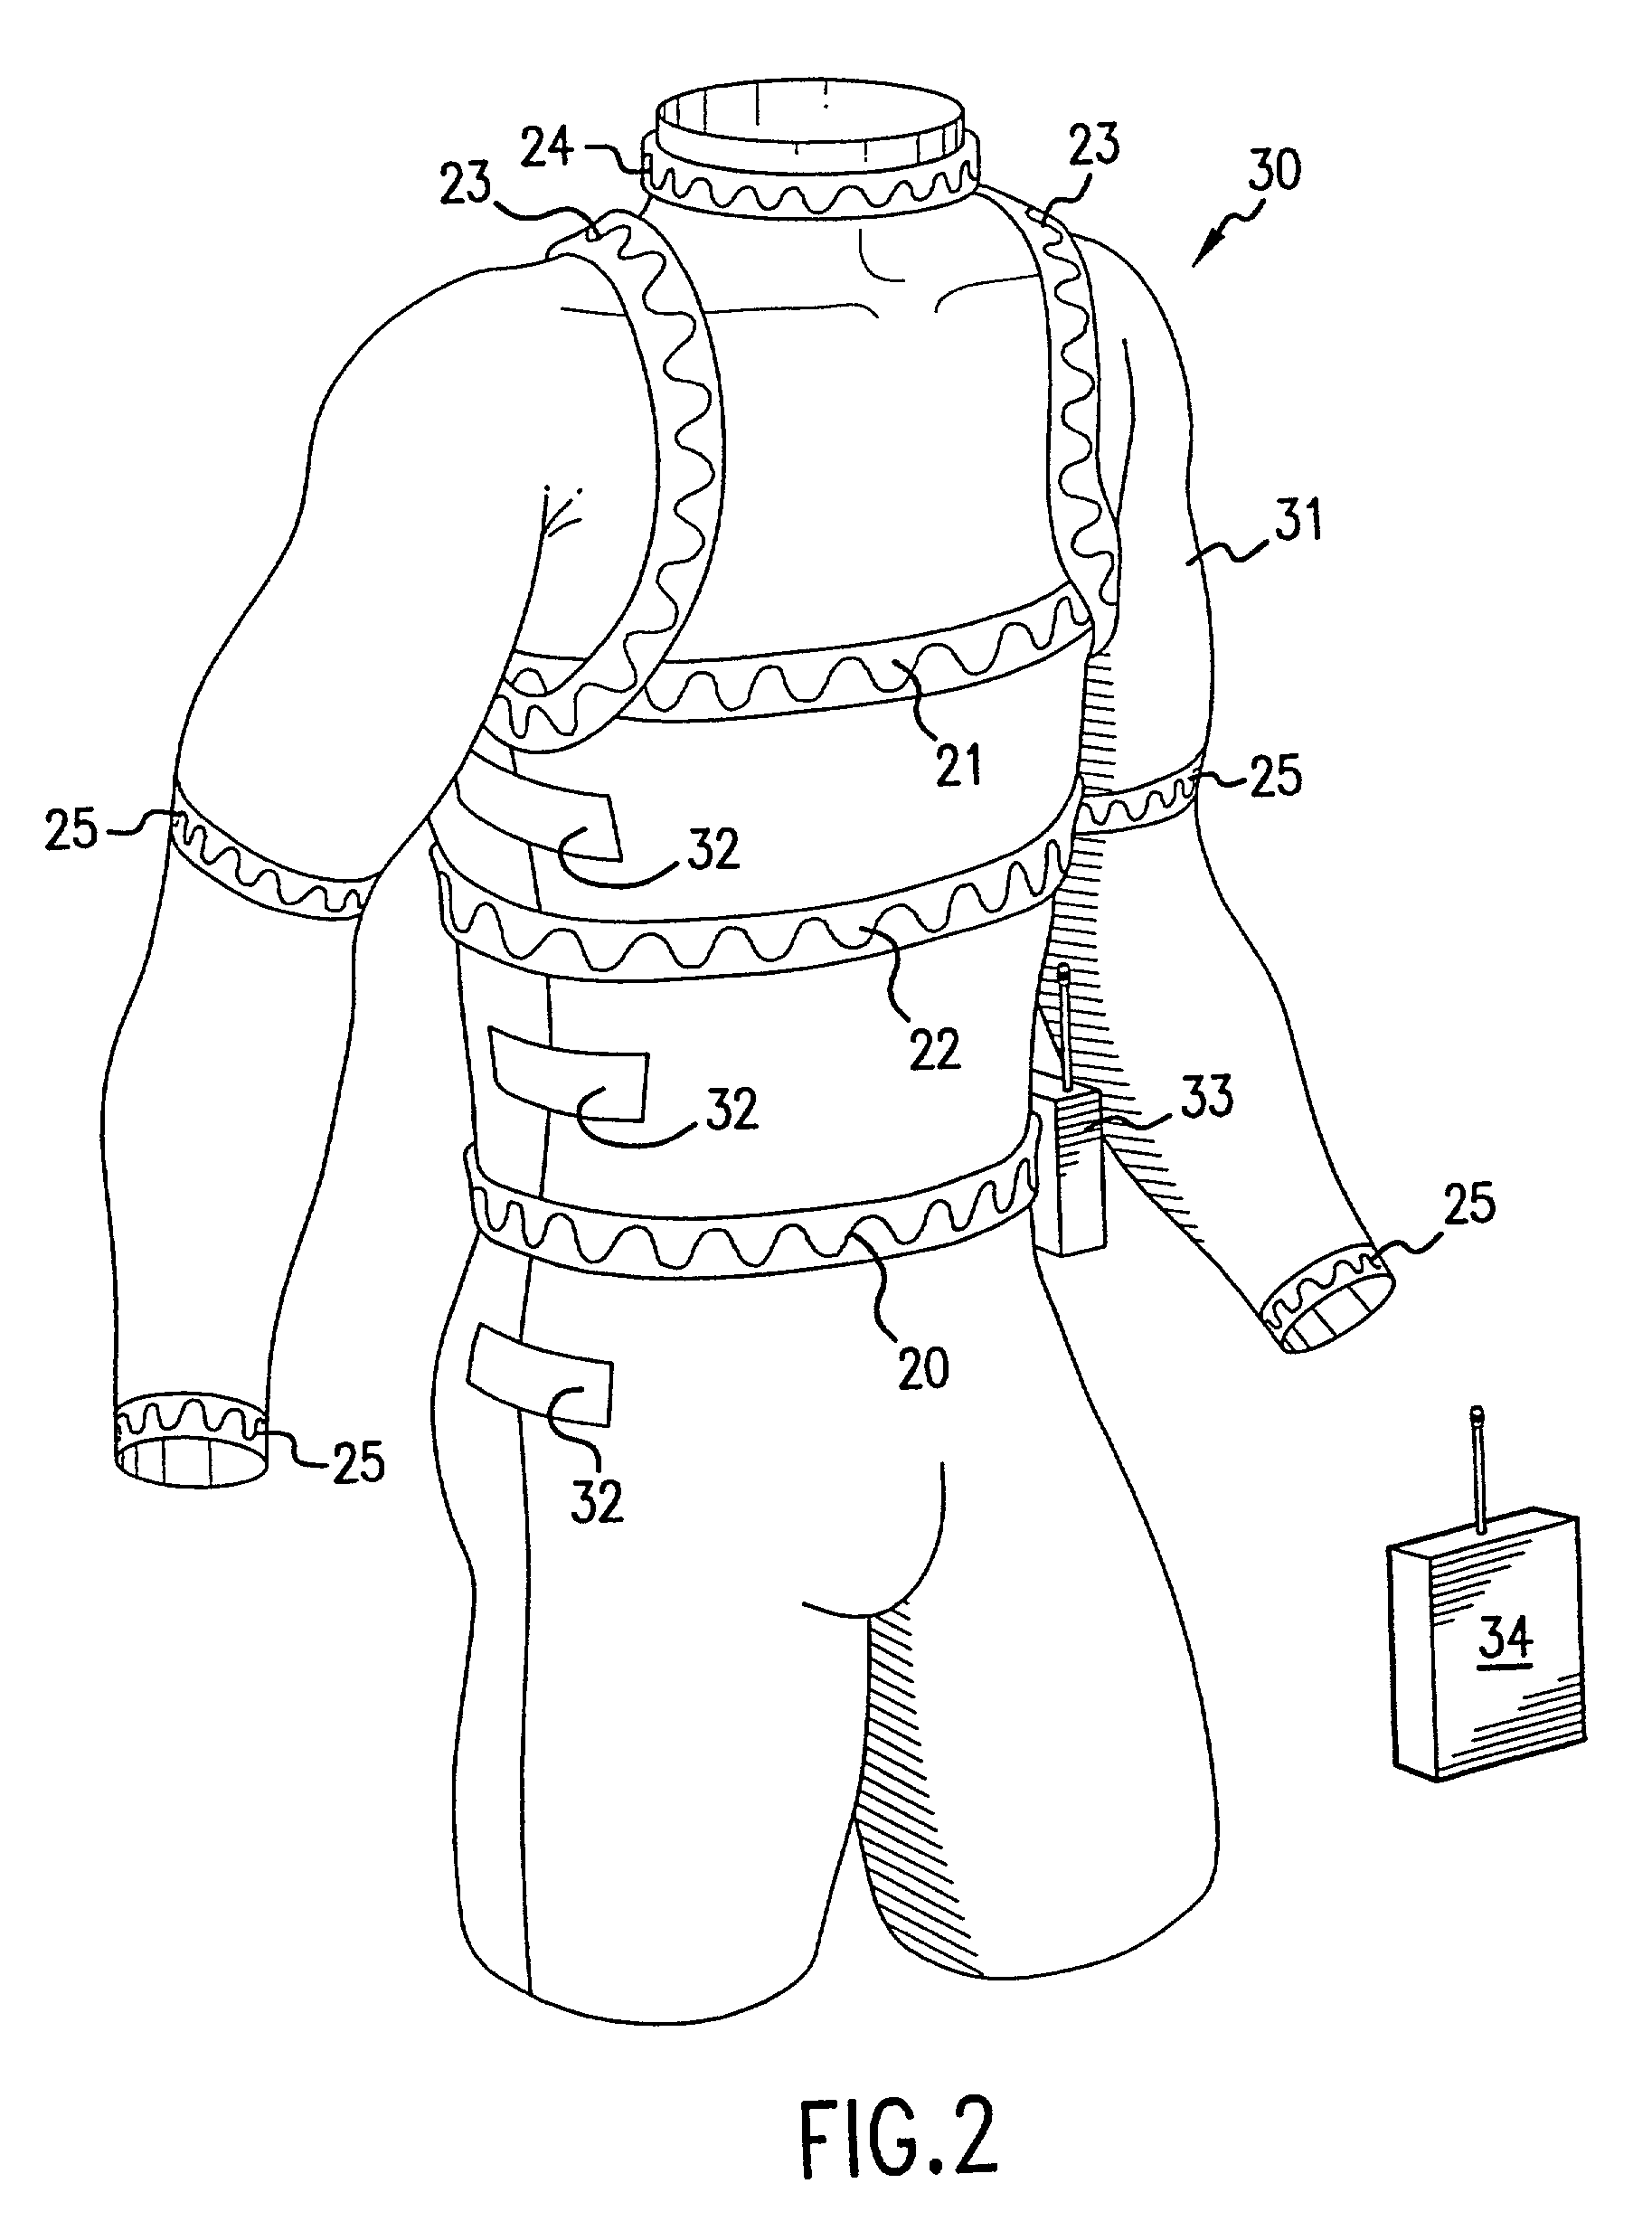 Systems and methods for ambulatory monitoring of physiological signs